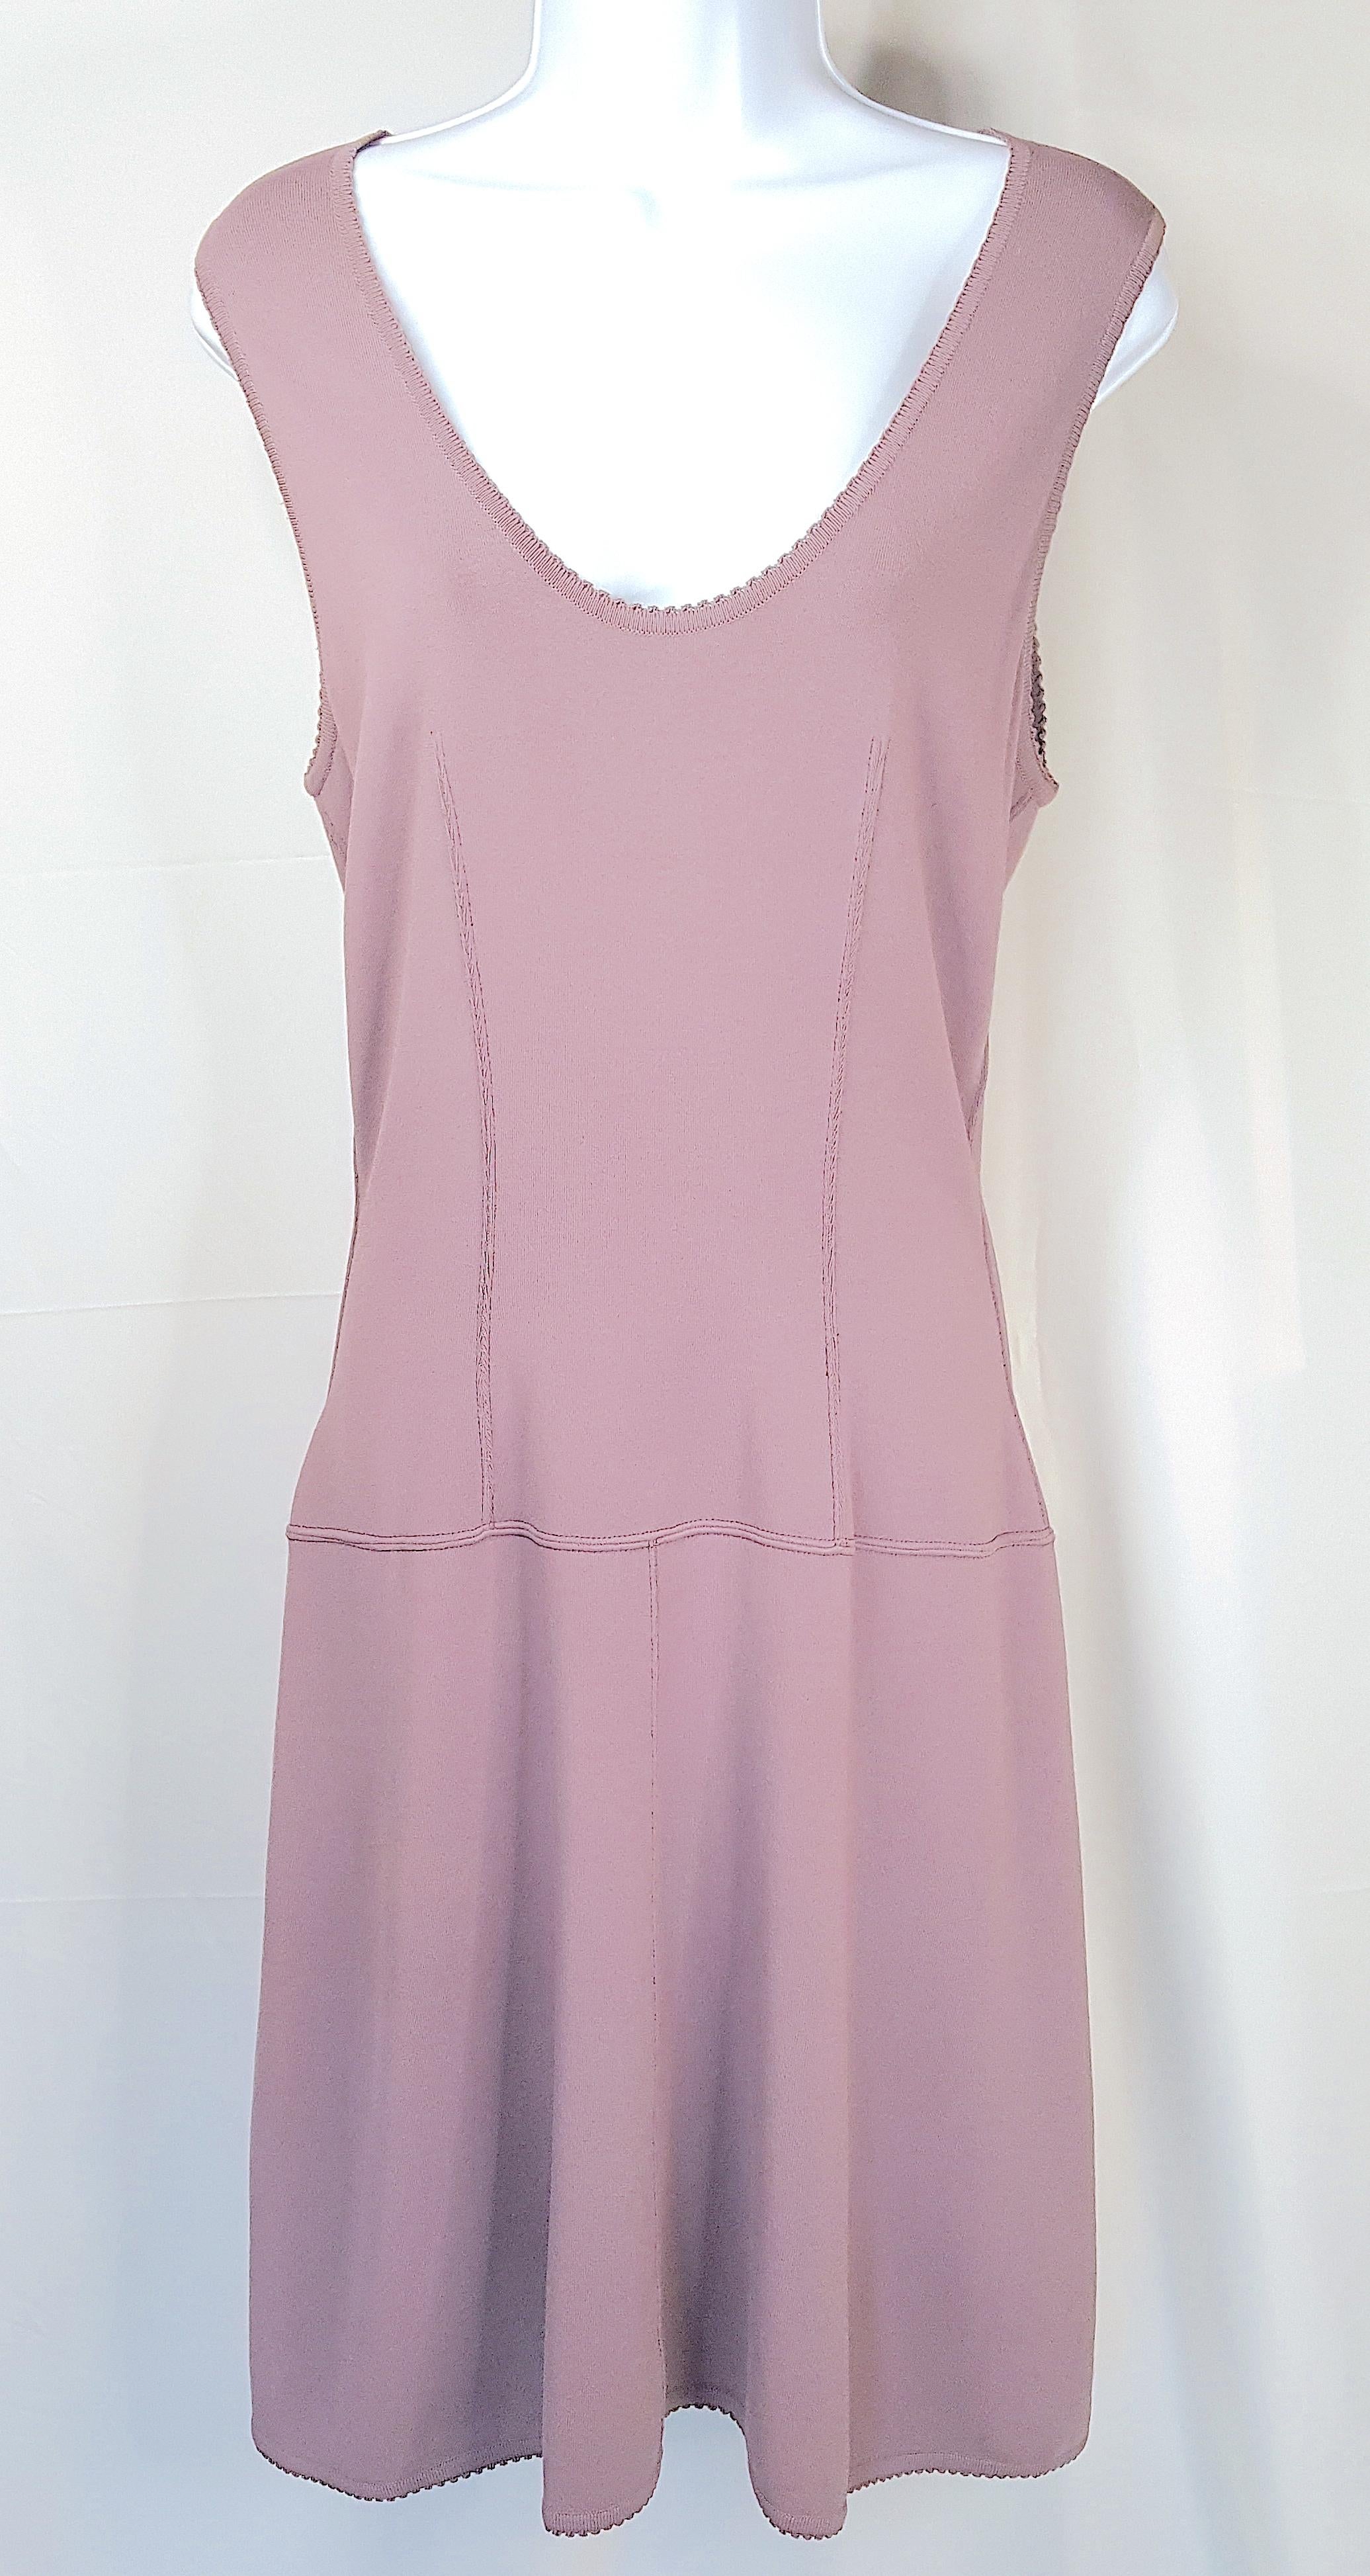 Alaia Paris 1990s BiasCut CurvilinearSeamedButt DropWaist Draping Knit Dress In Good Condition For Sale In Chicago, IL